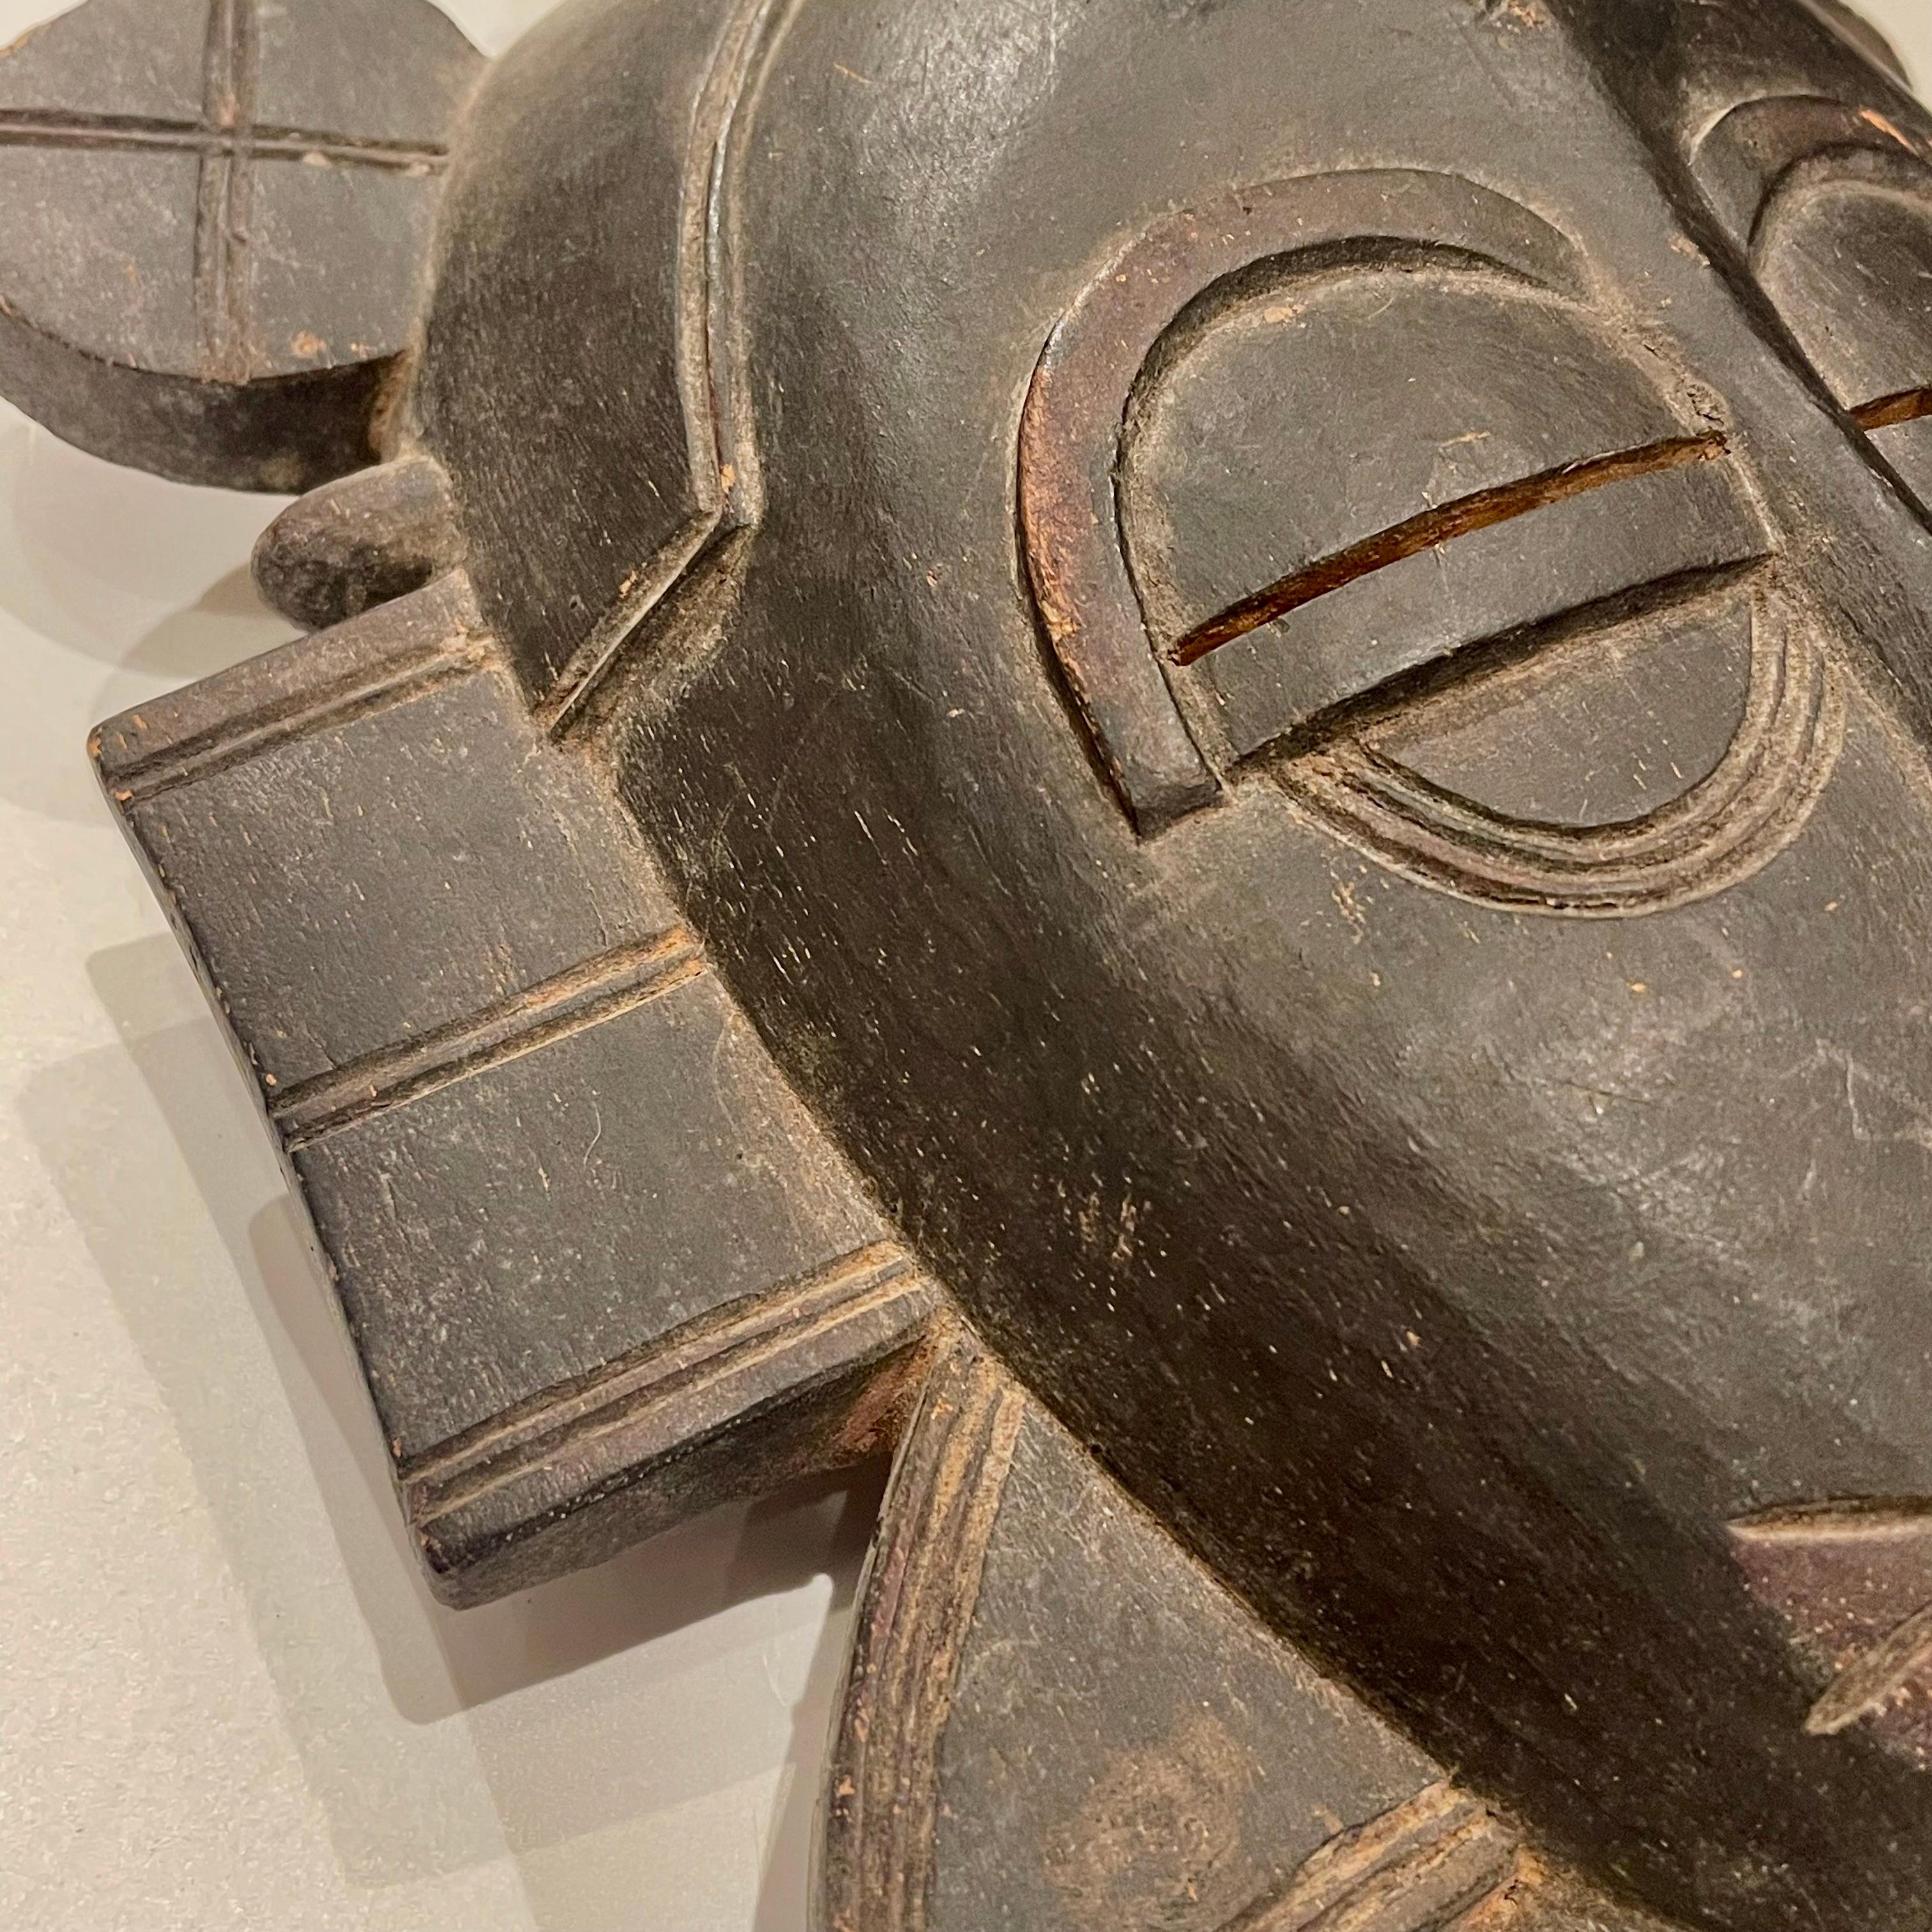 Hand-Carved Senoufo Ivory Coast 'Kpelié' Initiation DancMask, First Half of the 20th Century For Sale